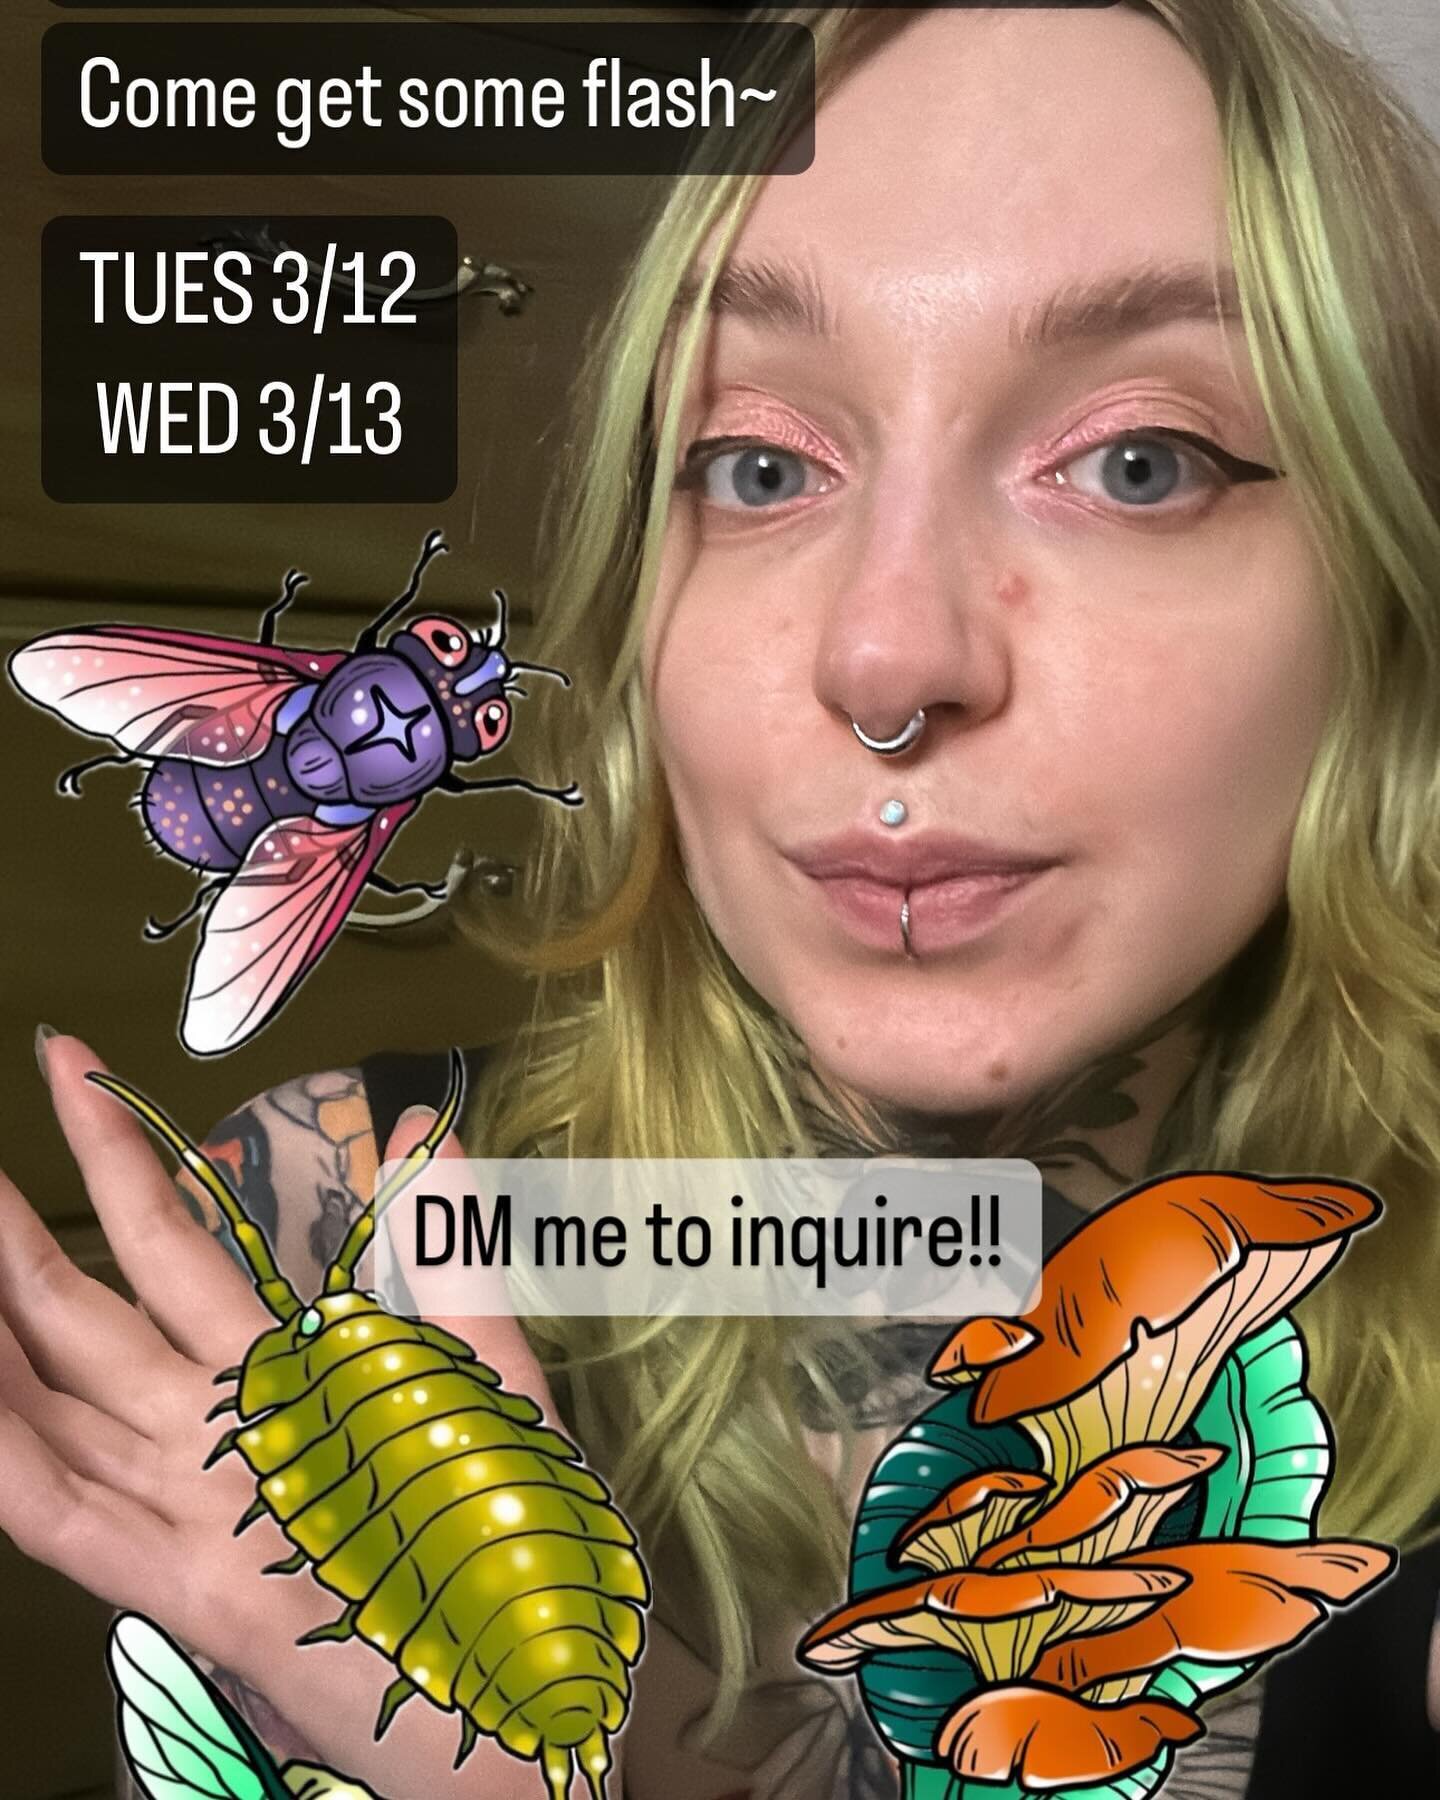 FLASH OPENINGS NEXT WEEK !!
-Tuesday 3/12
-Wednesday 3/13
Start time from 1-5pm depending on piece~
✨DM TO INQUIRE, QUESTION, OR CLAIM✨
&hellip;
Tooth faeries are $3-350,
Little bugs are $350-450,
Potion snail is $450-600
Bigger pieces are $6-750, al